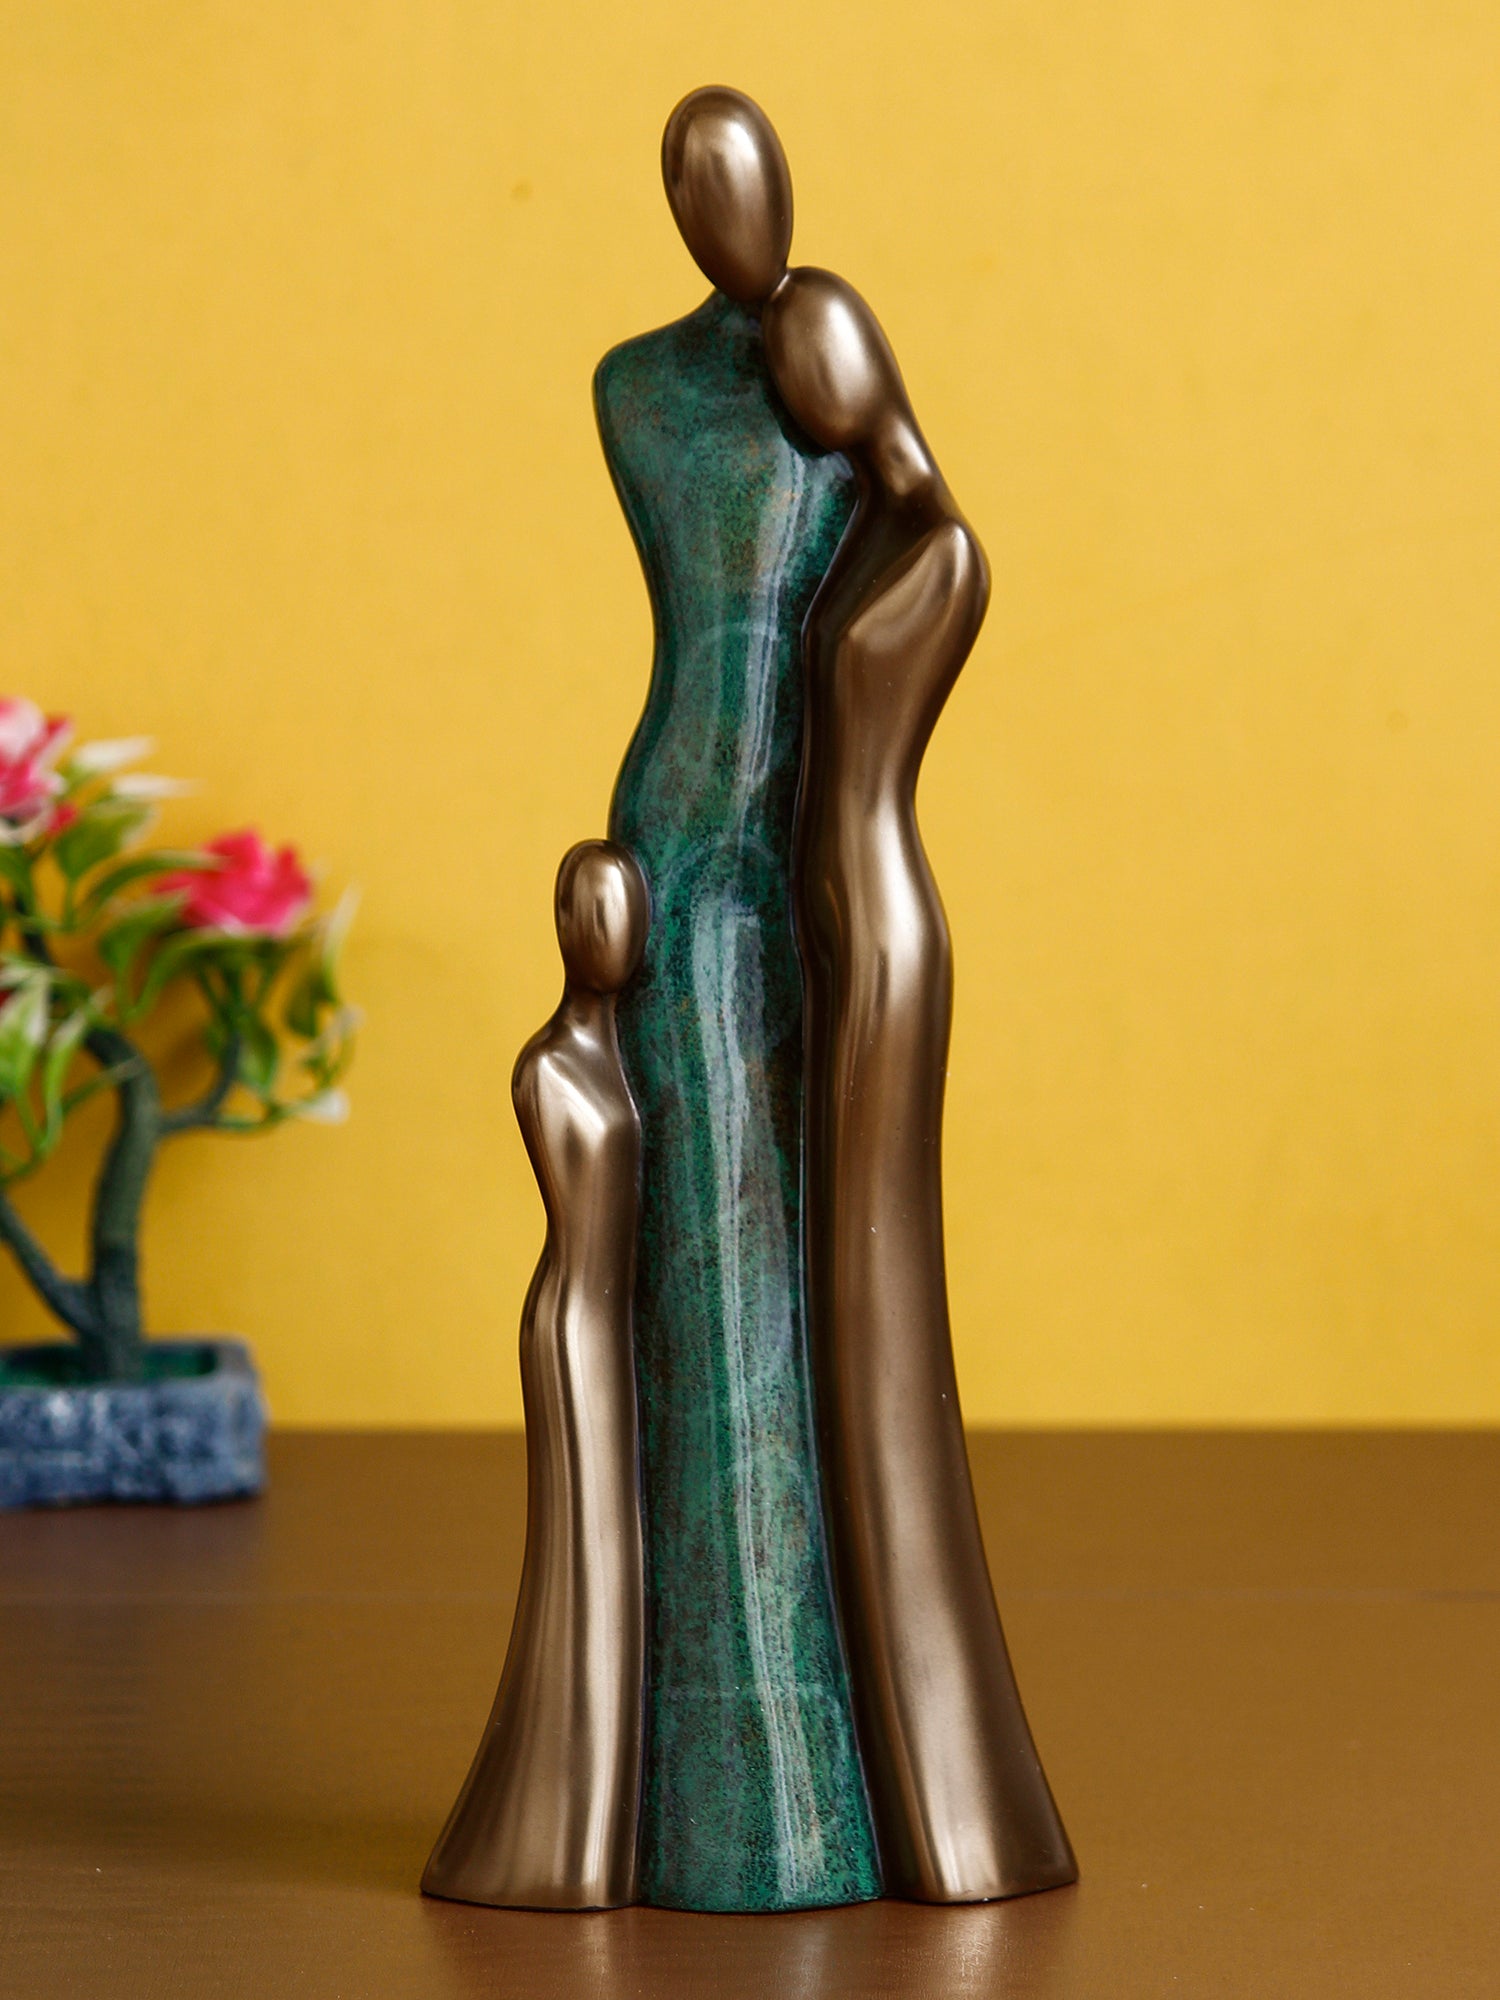 Polyresin and Bronze Family of Mother, Daughter and Grand Daughter Human Figurine Decorative Showpiece (Green and Brown) 1